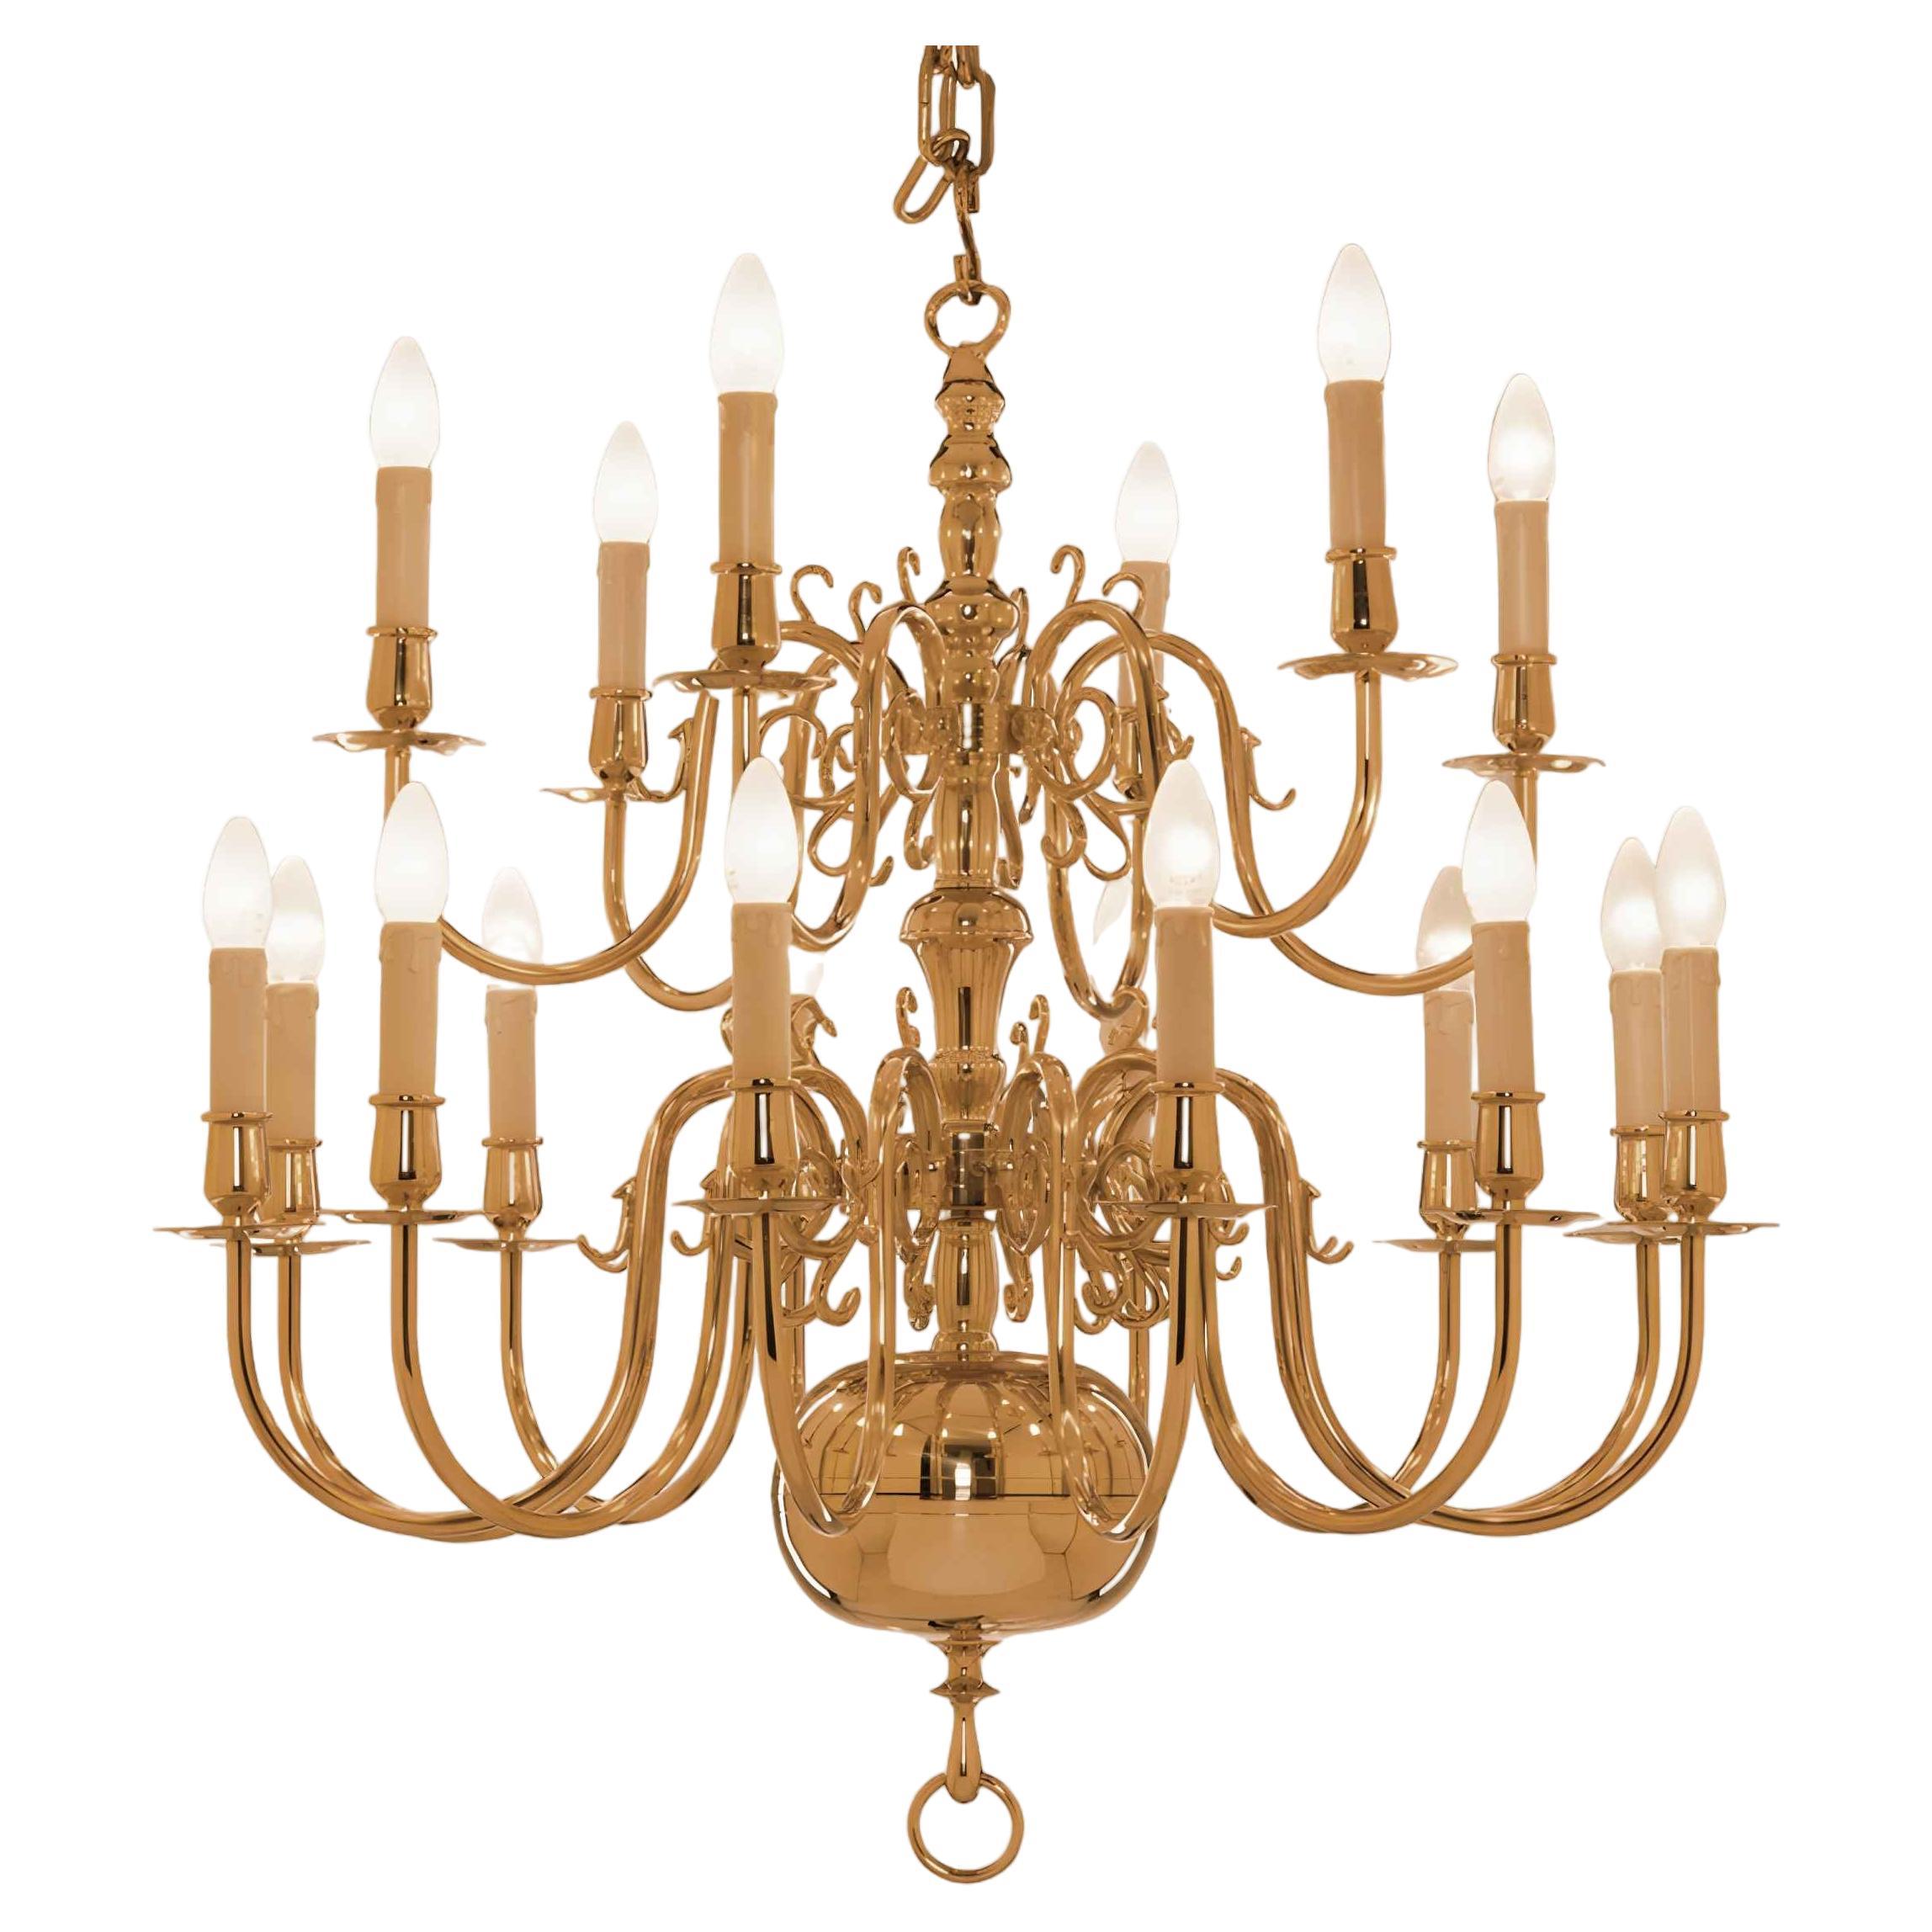 2 Tier 19th Century Electric Model Dutch Brass Chandelier with 18 Lights H80xW82 For Sale